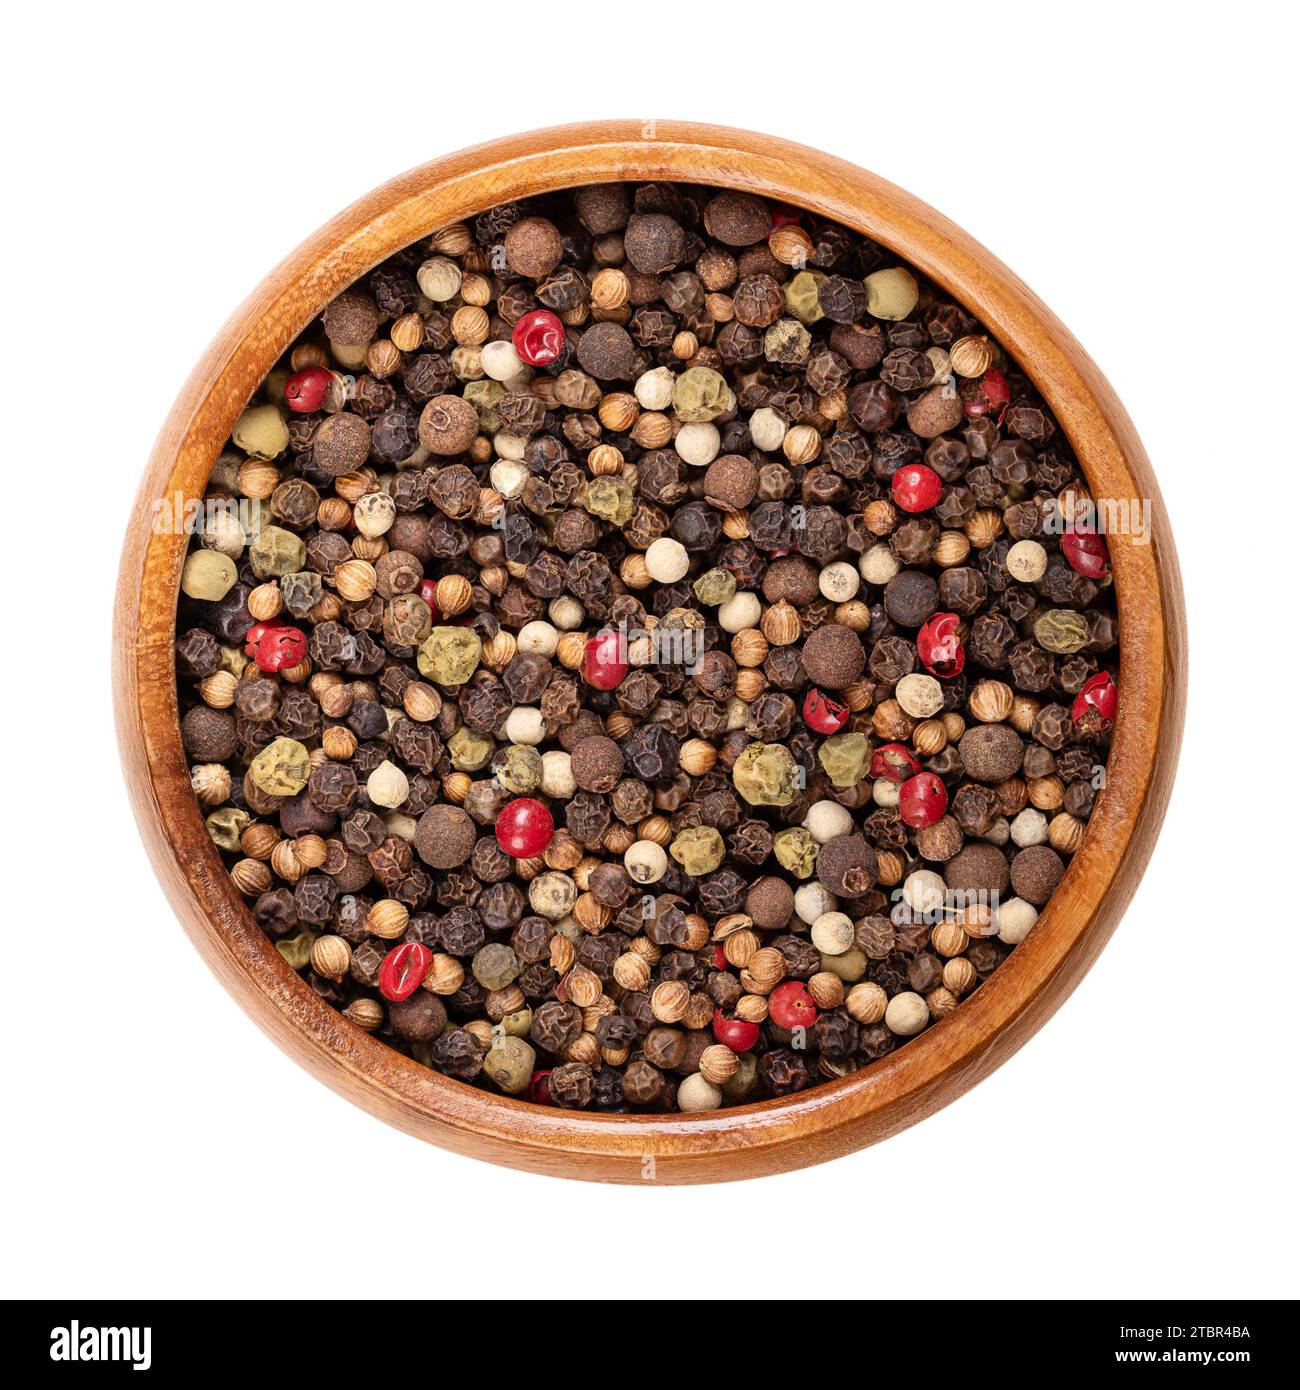 Piquant peppercorn mix in a wooden bowl. Spicy mixture of dried and whole black, green and white and peppercorns, rose pepper, coriander and allspice. Stock Photo